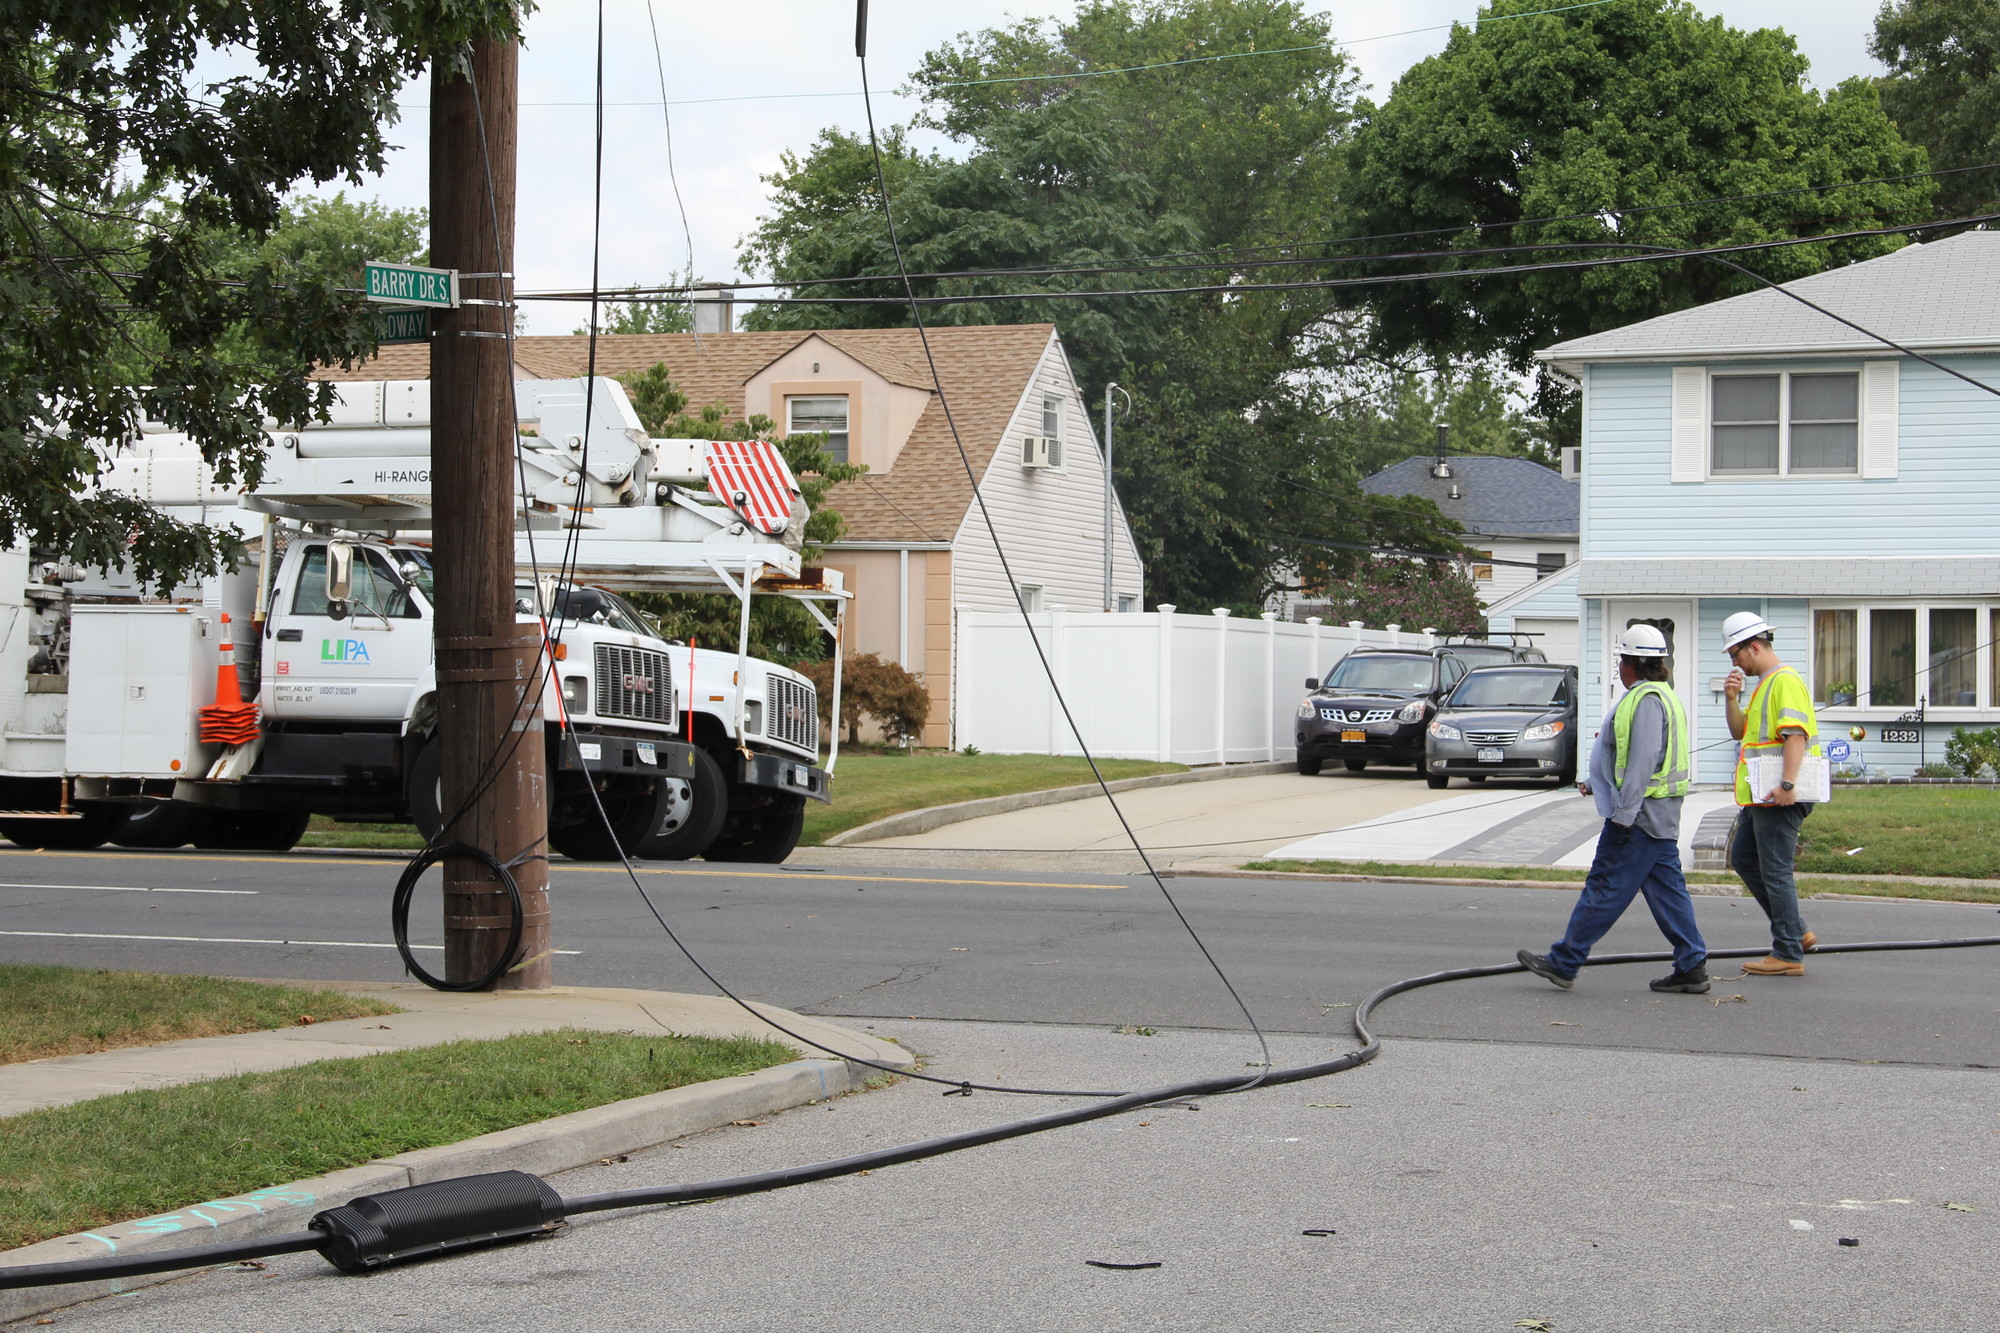 Wires were ripped down throughout southern Elmont and North Valley Stream, including at the corner of Dutch Broadway and Barry Drive.